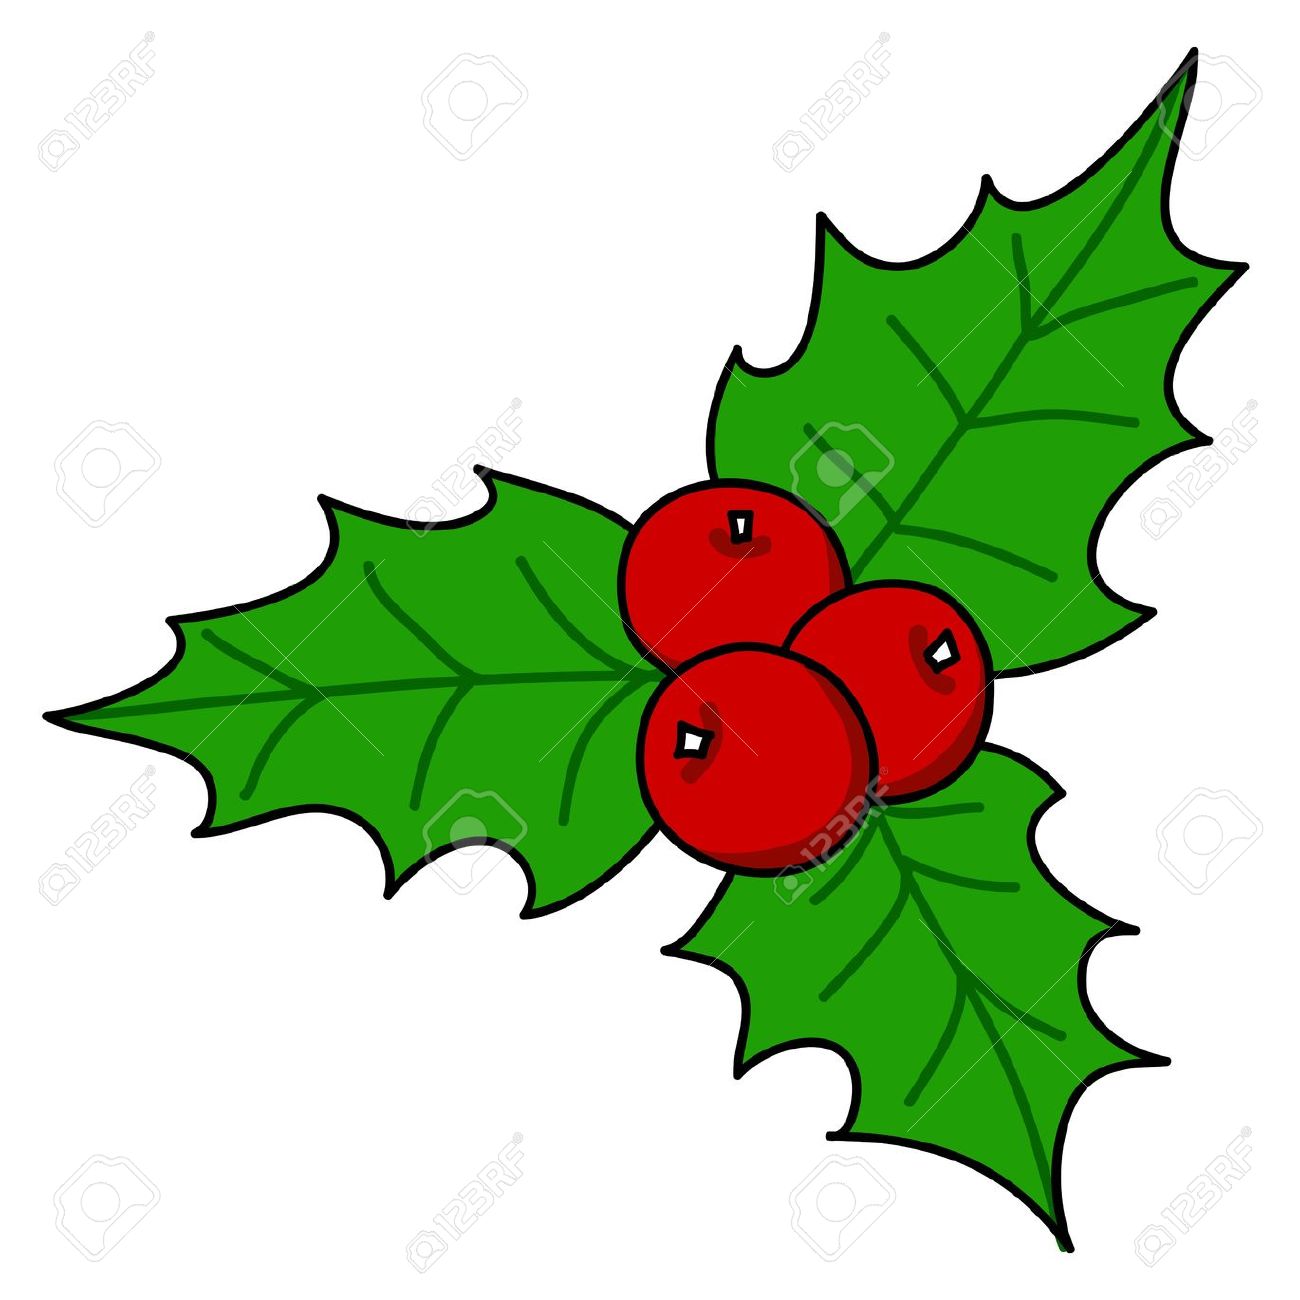  clipartlook. Berry clipart leaves holly